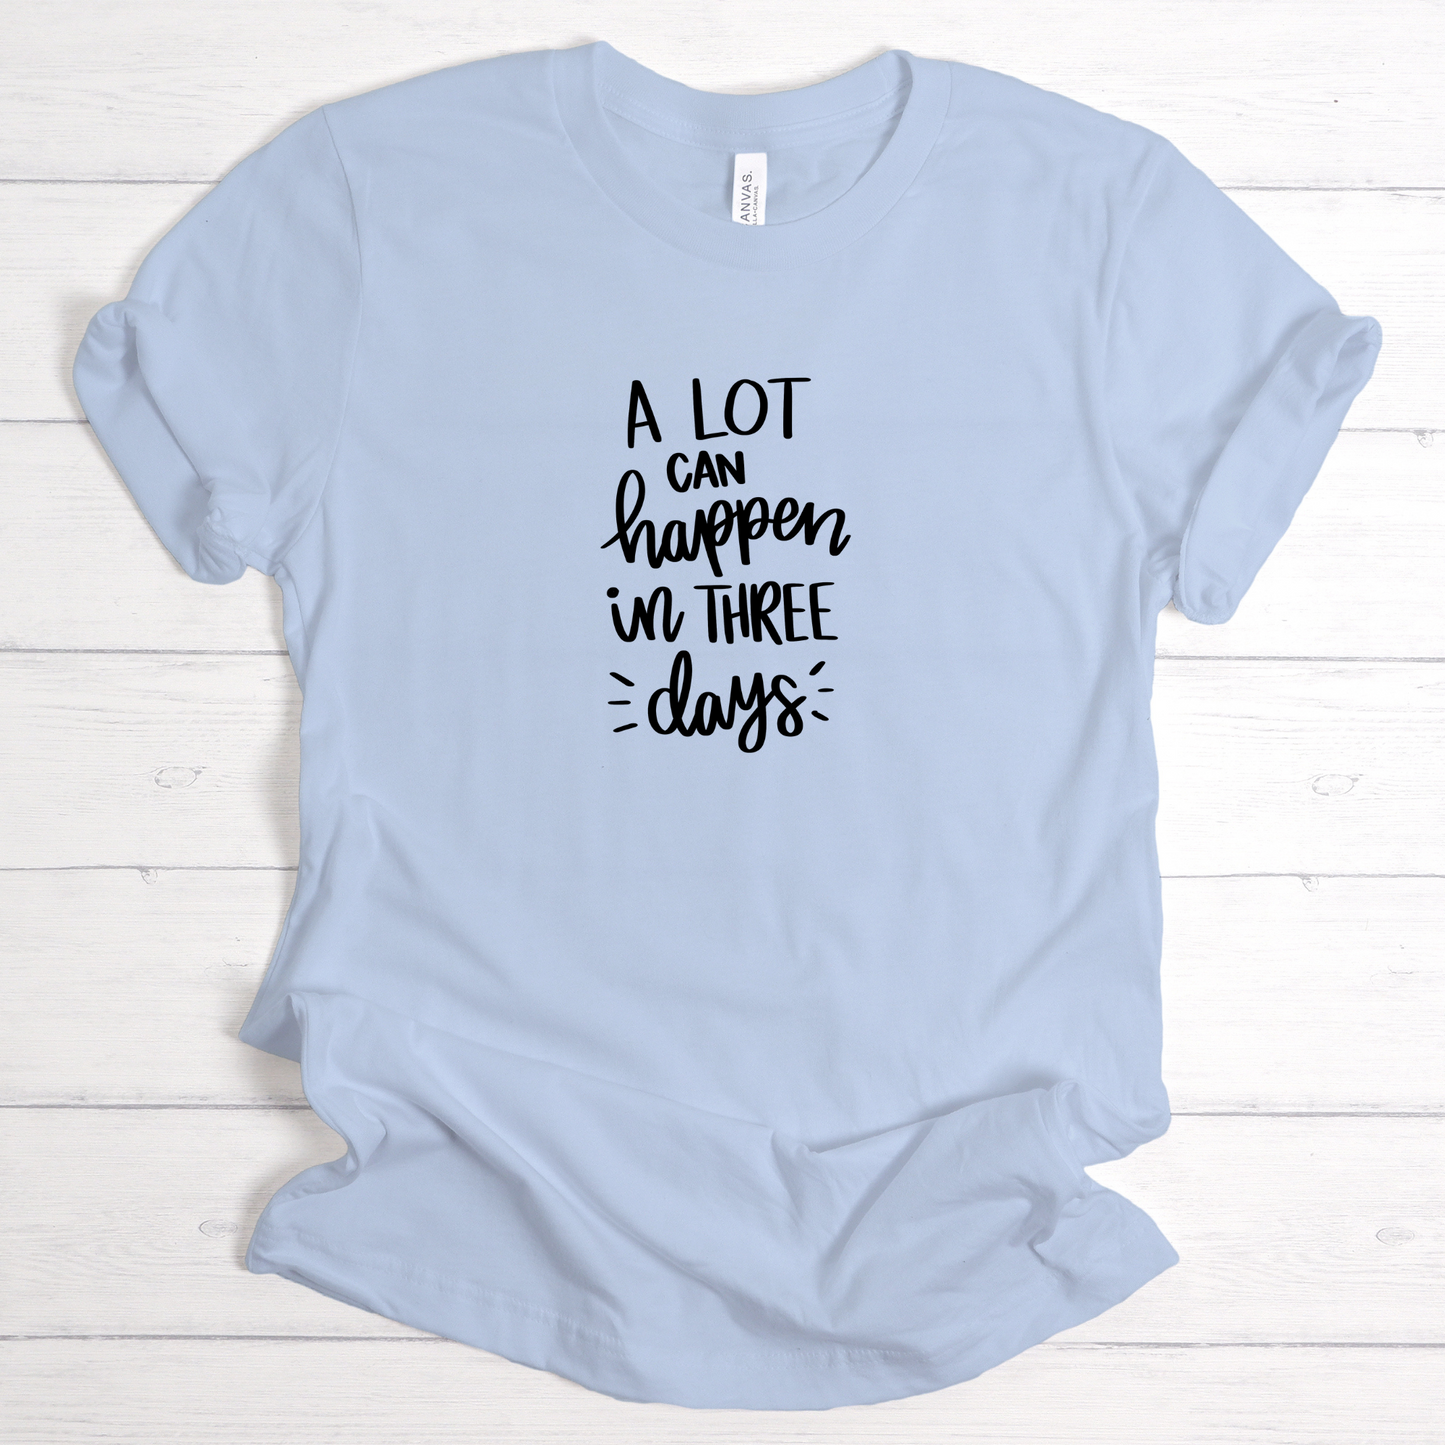 Alot can happen in 3 days Graphic Shirt